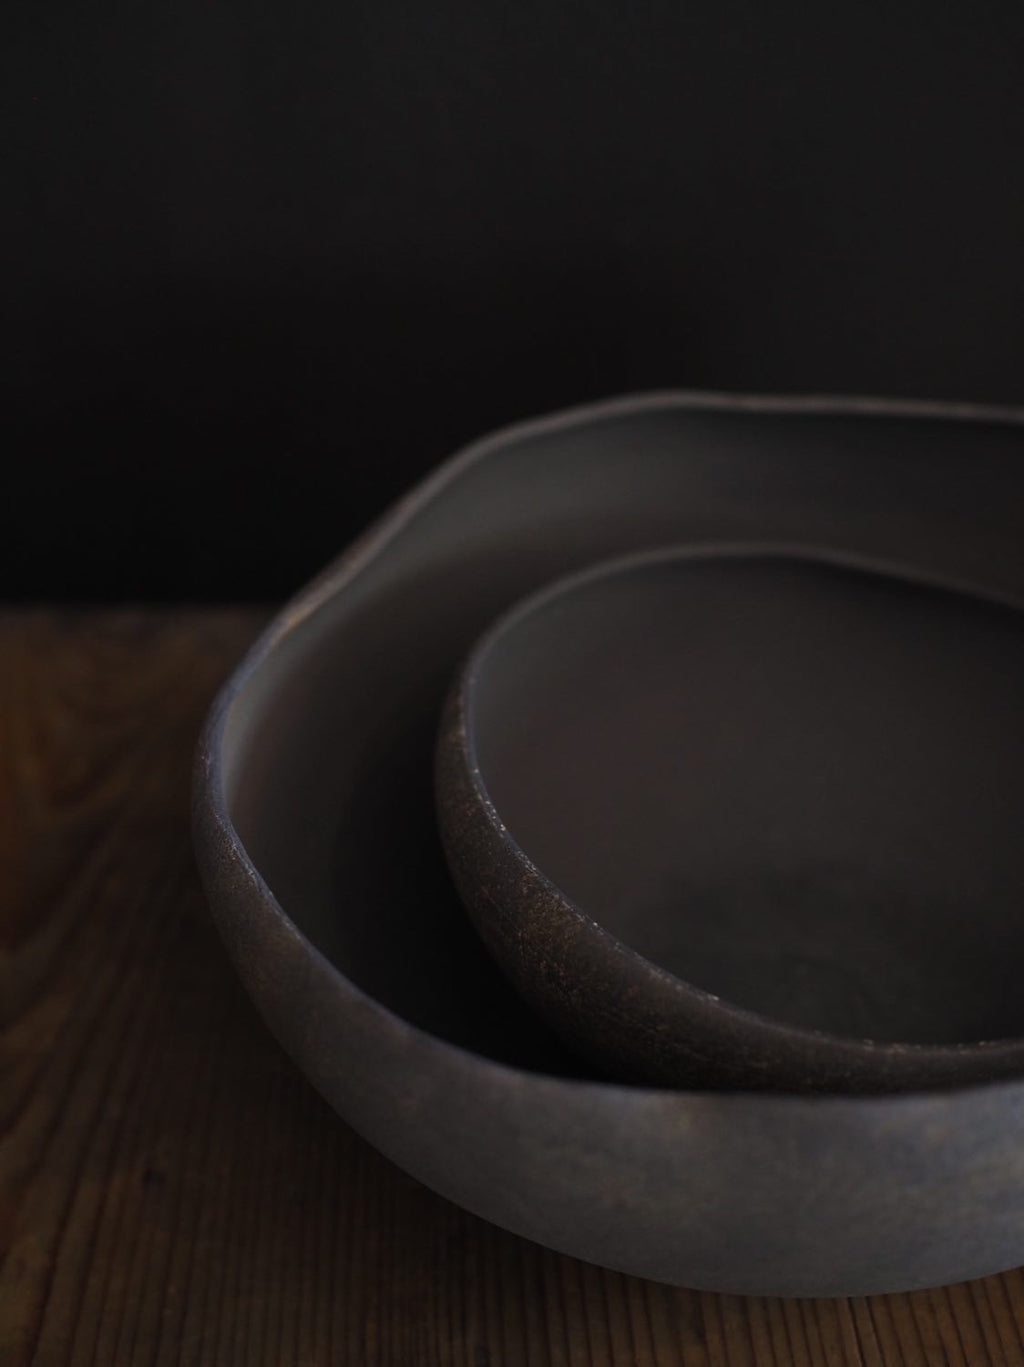 Bowls and Large Plate